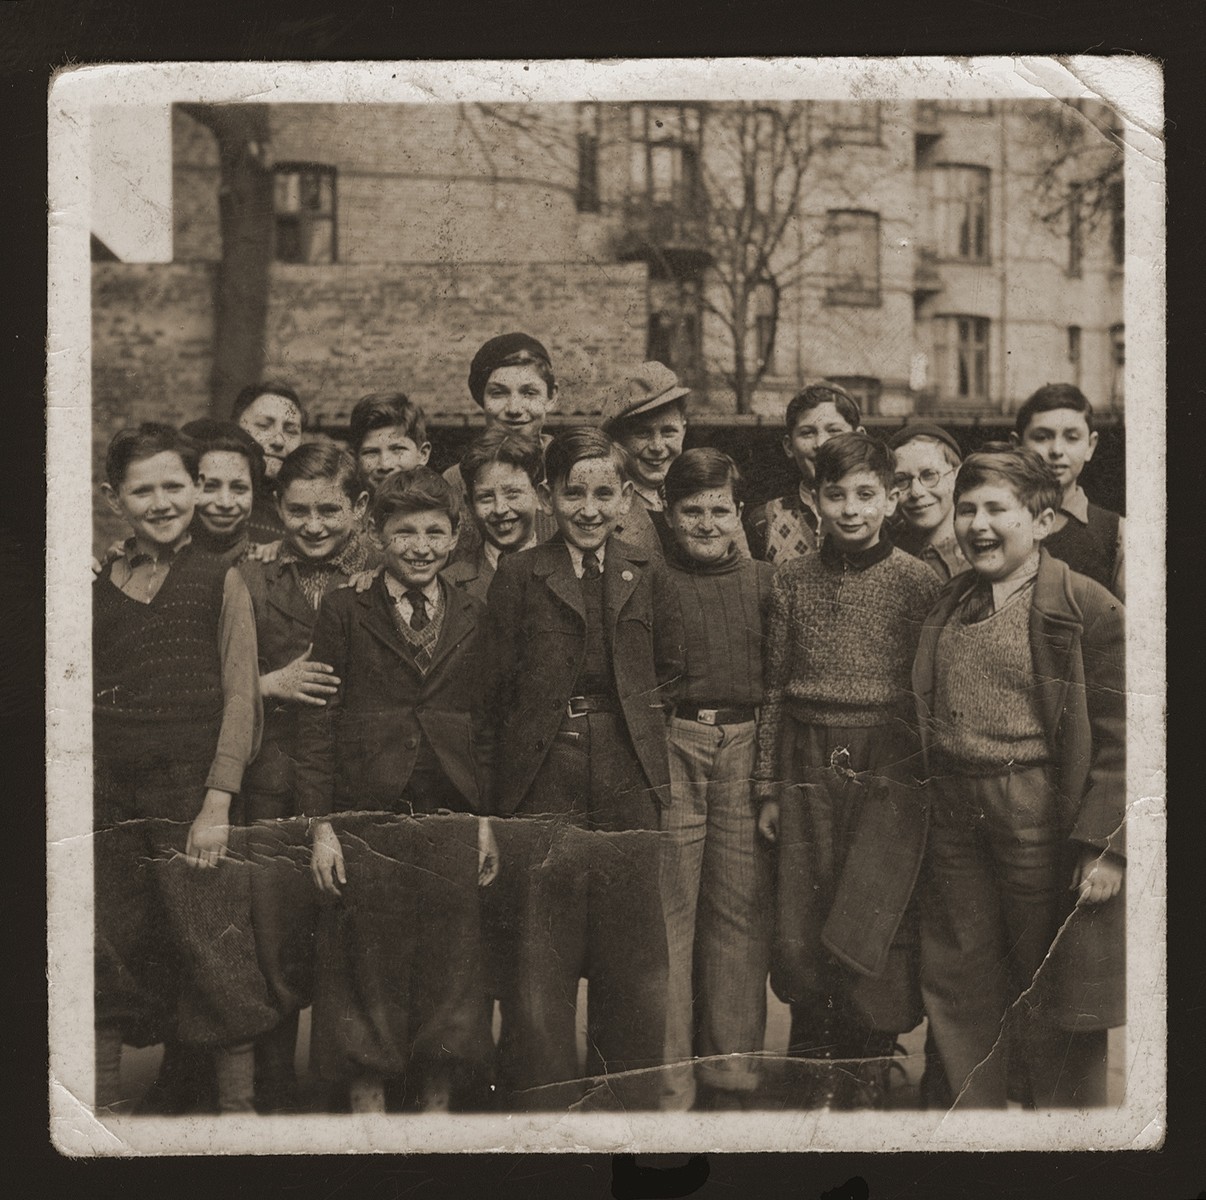 Boys from the Mosaisk Drengeskole (Mosaic Boys School).  

Among those pictured are Artur Arnheim (front row, left), Raphael Sampolinsky (second from left), Bent Melchior, grandson of chief rabbi (fifth from left), Manfred Hildershein (back row center), Siegried Vogel (third from right).
 
The Mosaic School for Boys and the Caroline School for Girls were established in the beginning of the nineteenth century for the purpose of acculturating the children of Russian Jewish immigrants into Danish culture.  Though most of the teachers were not Jewish, the school also taught Jewish history and religion.